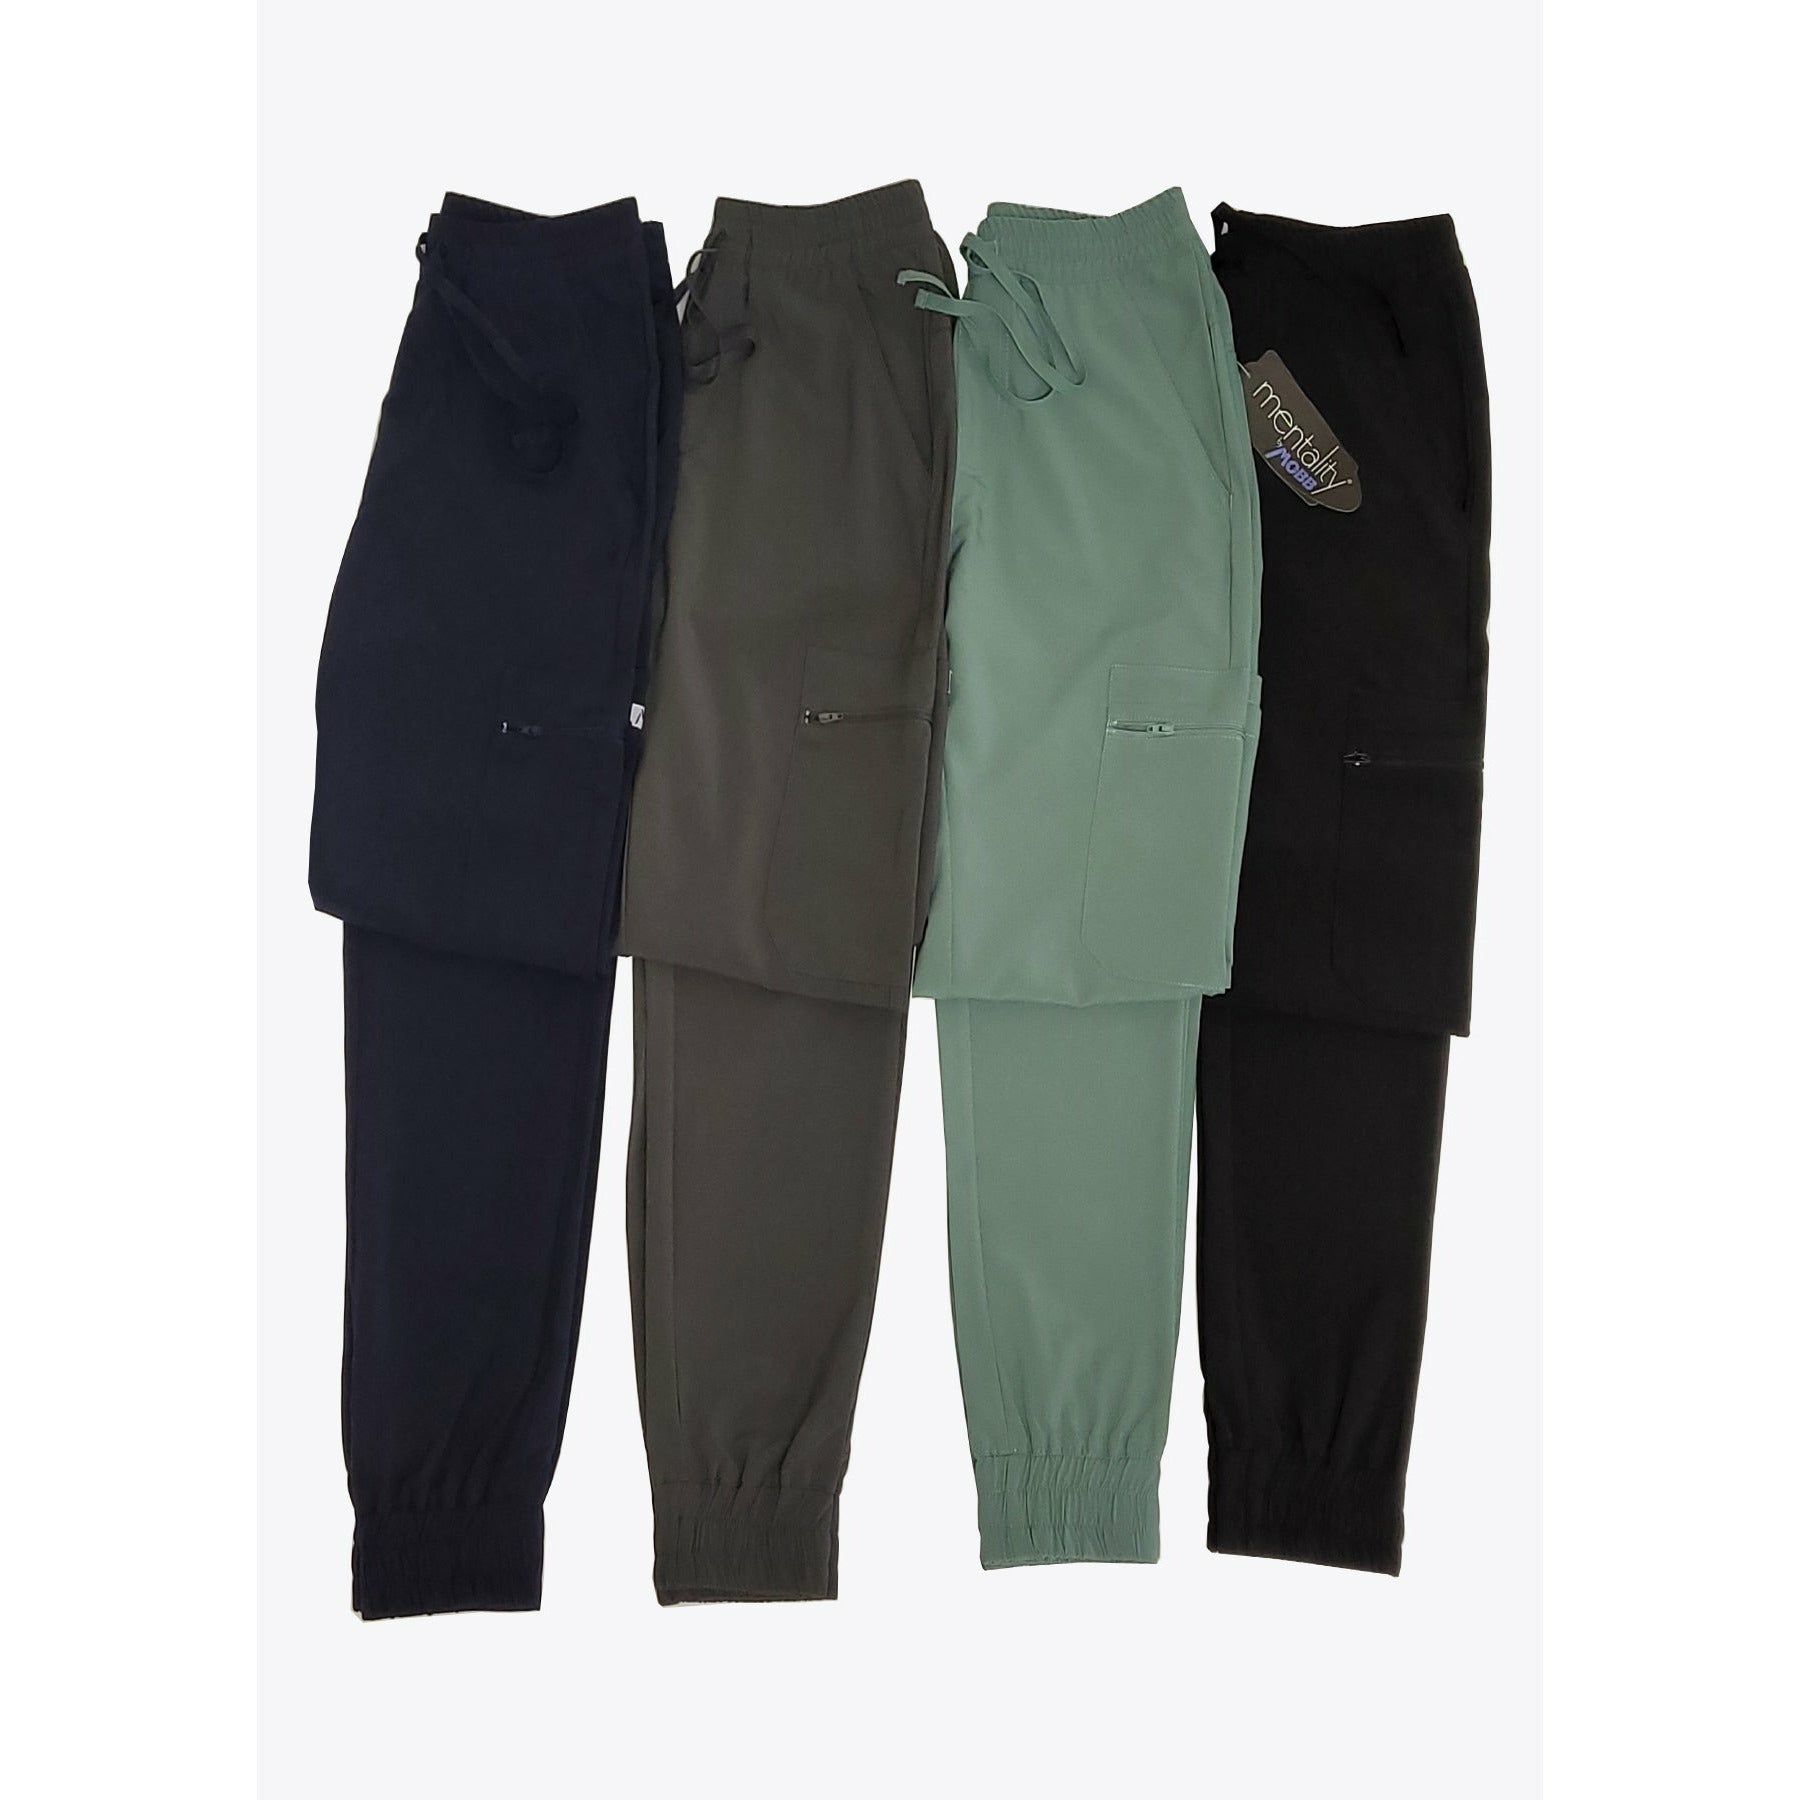 T7010/P7011 V-neck top The Alex Style & The Adrian Jogger Fit Pant